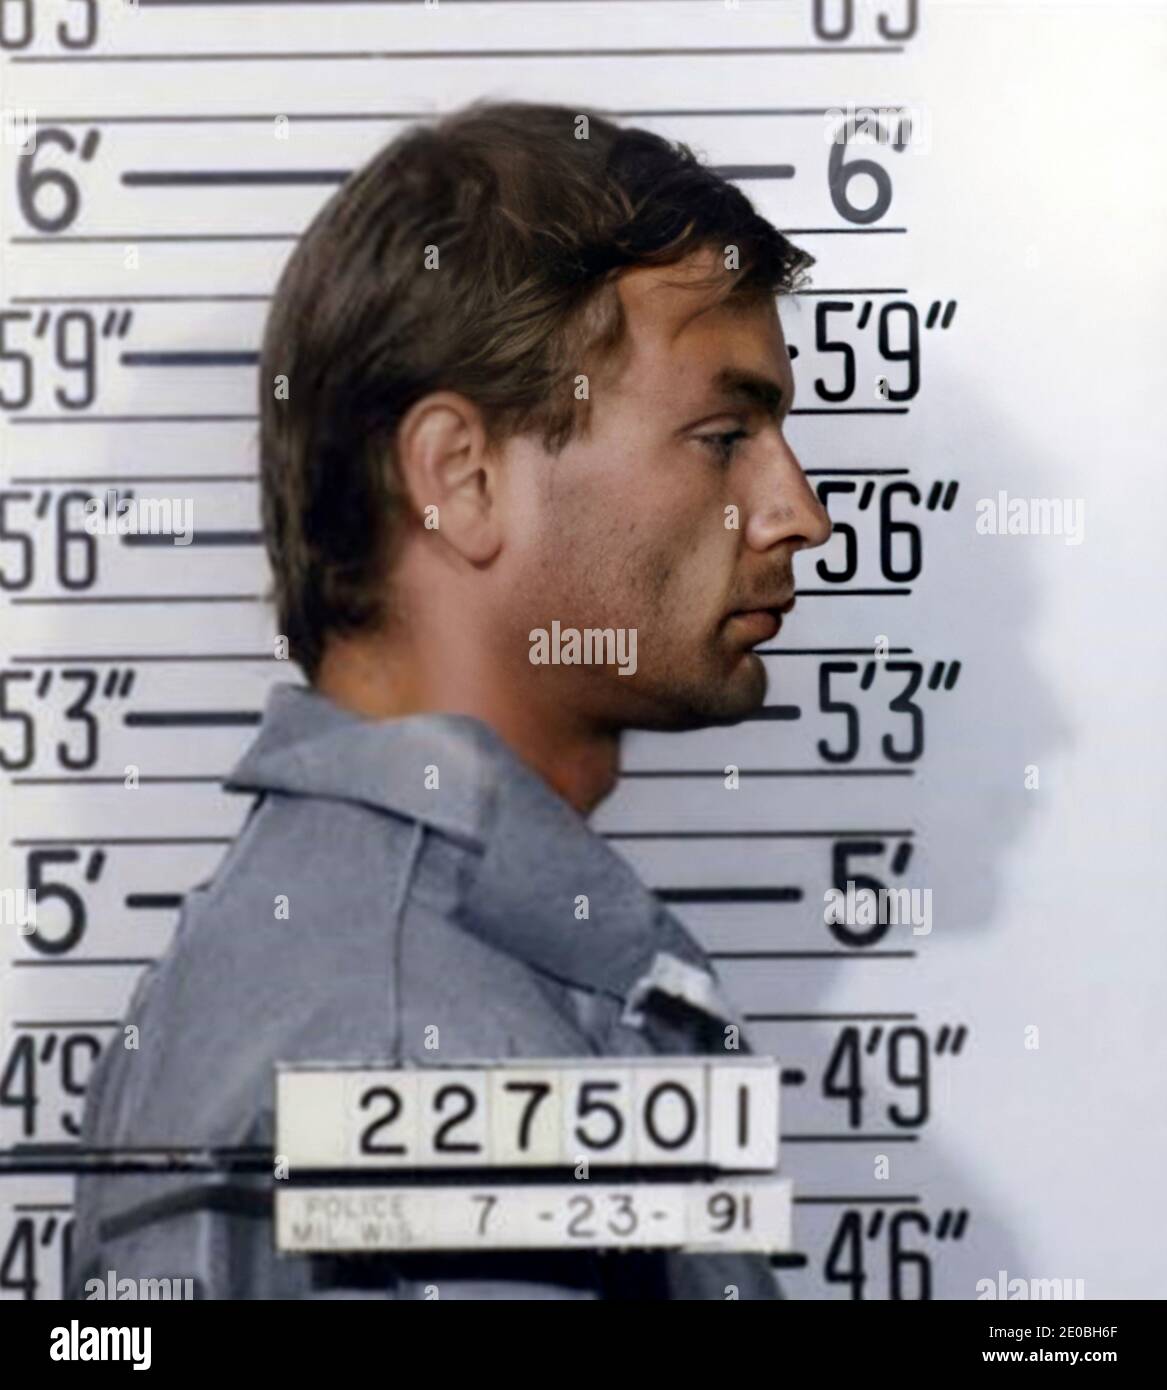 1991 , 23 july , Milwaukee , USA : JEFFREY DAHMER aka the MILWAUKEE CANNIBAL ( 1960 - 1994 ) when was arrested  like serial-killer in a photobooth of Police Department the day 8 august 1982 . Dahmer was an American spree killer who murdered at least 17 people , from 1978 to 1991 . - SERIAL KILLER - Mostro di Milwaukee - The Monster of - portrait - ritratto - serial-killer - assassino seriale - CRONACA NERA - criminale - criminal - SERIAL KILLER  - GAY - LGBT - CANNIBALE - cannibalismo - omosessuale - omosessualità - homosexuality - homosexual - foto segnaletica della Polizia - photo booth - pr Stock Photo